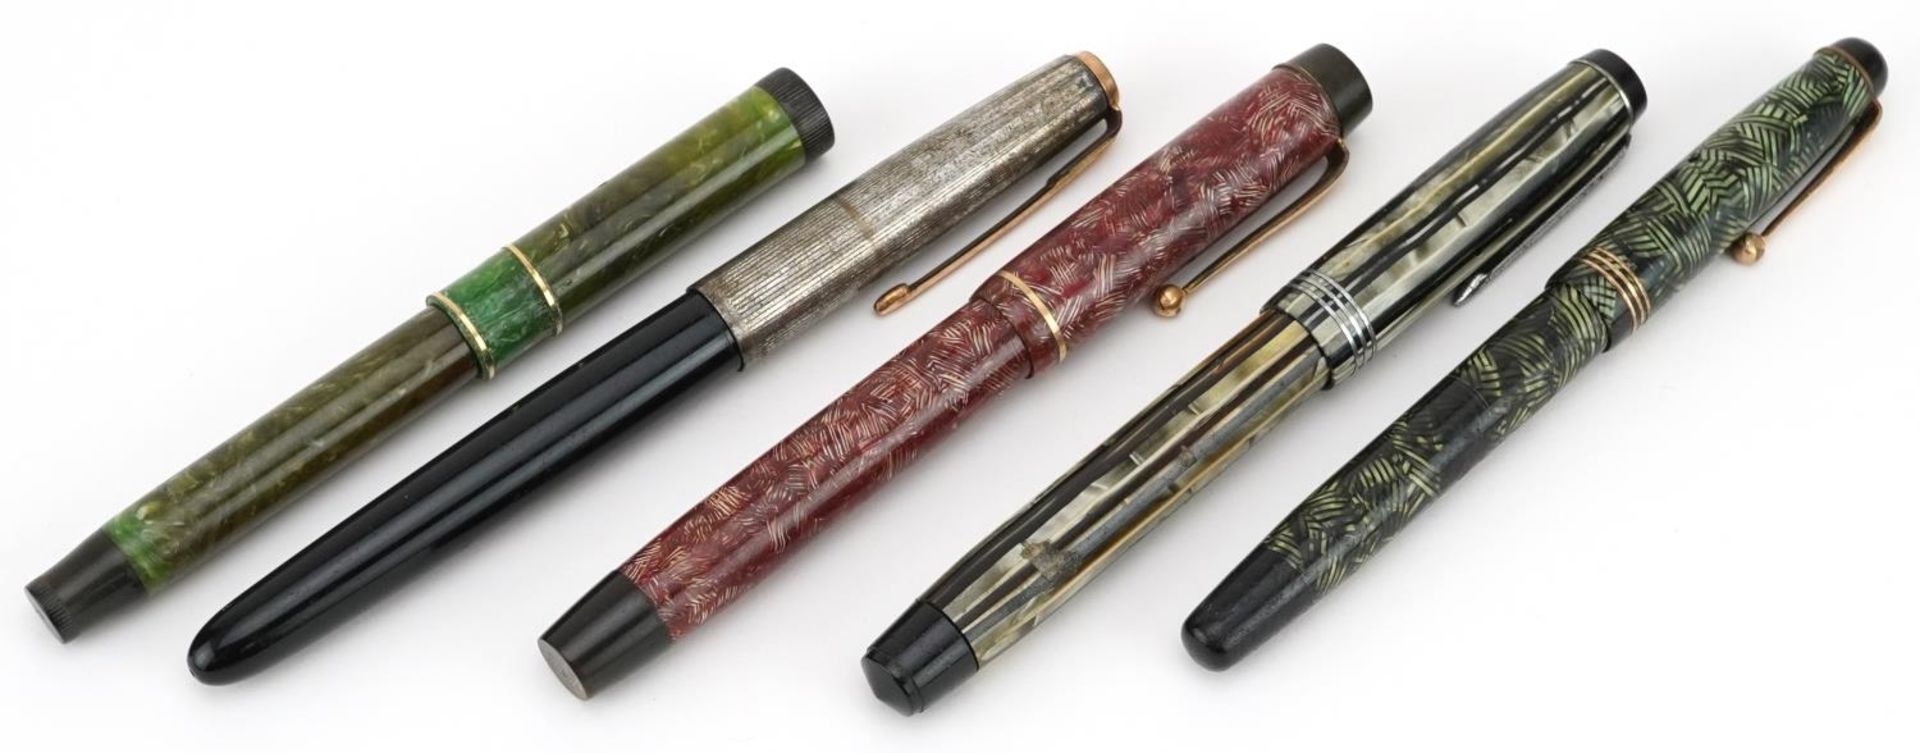 Five vintage Parker fountain pens, four marbleised, including Duofold, Lucky Curve and 51 with